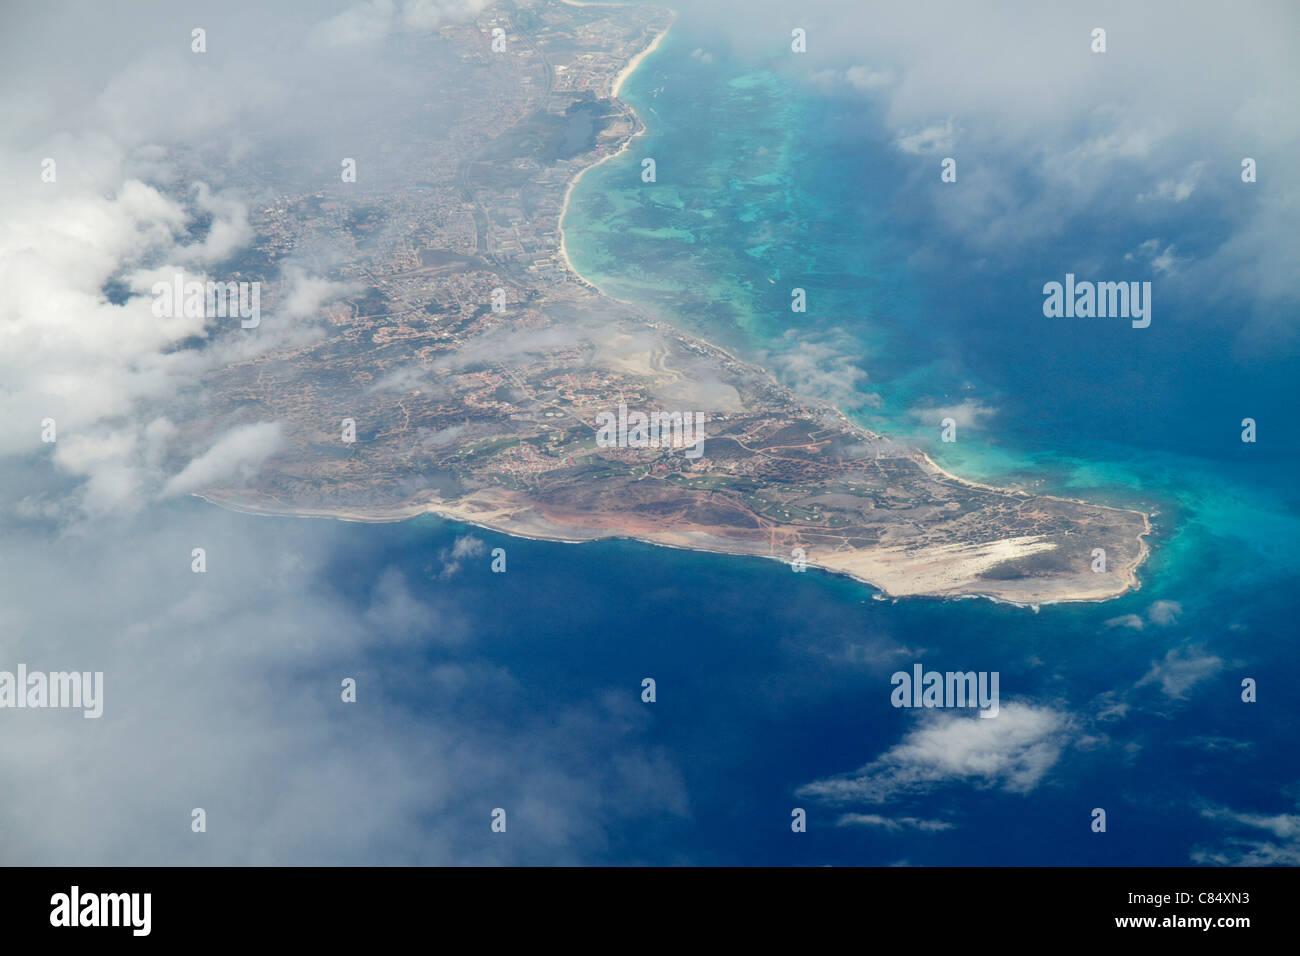 Aruba,Netherlands Lesser Leeward Antilles,ABC Islands,Dutch,Caribbean Sea,water,Arashi Bay,30,000 foot aerial view from,commercial airliner airplane p Stock Photo